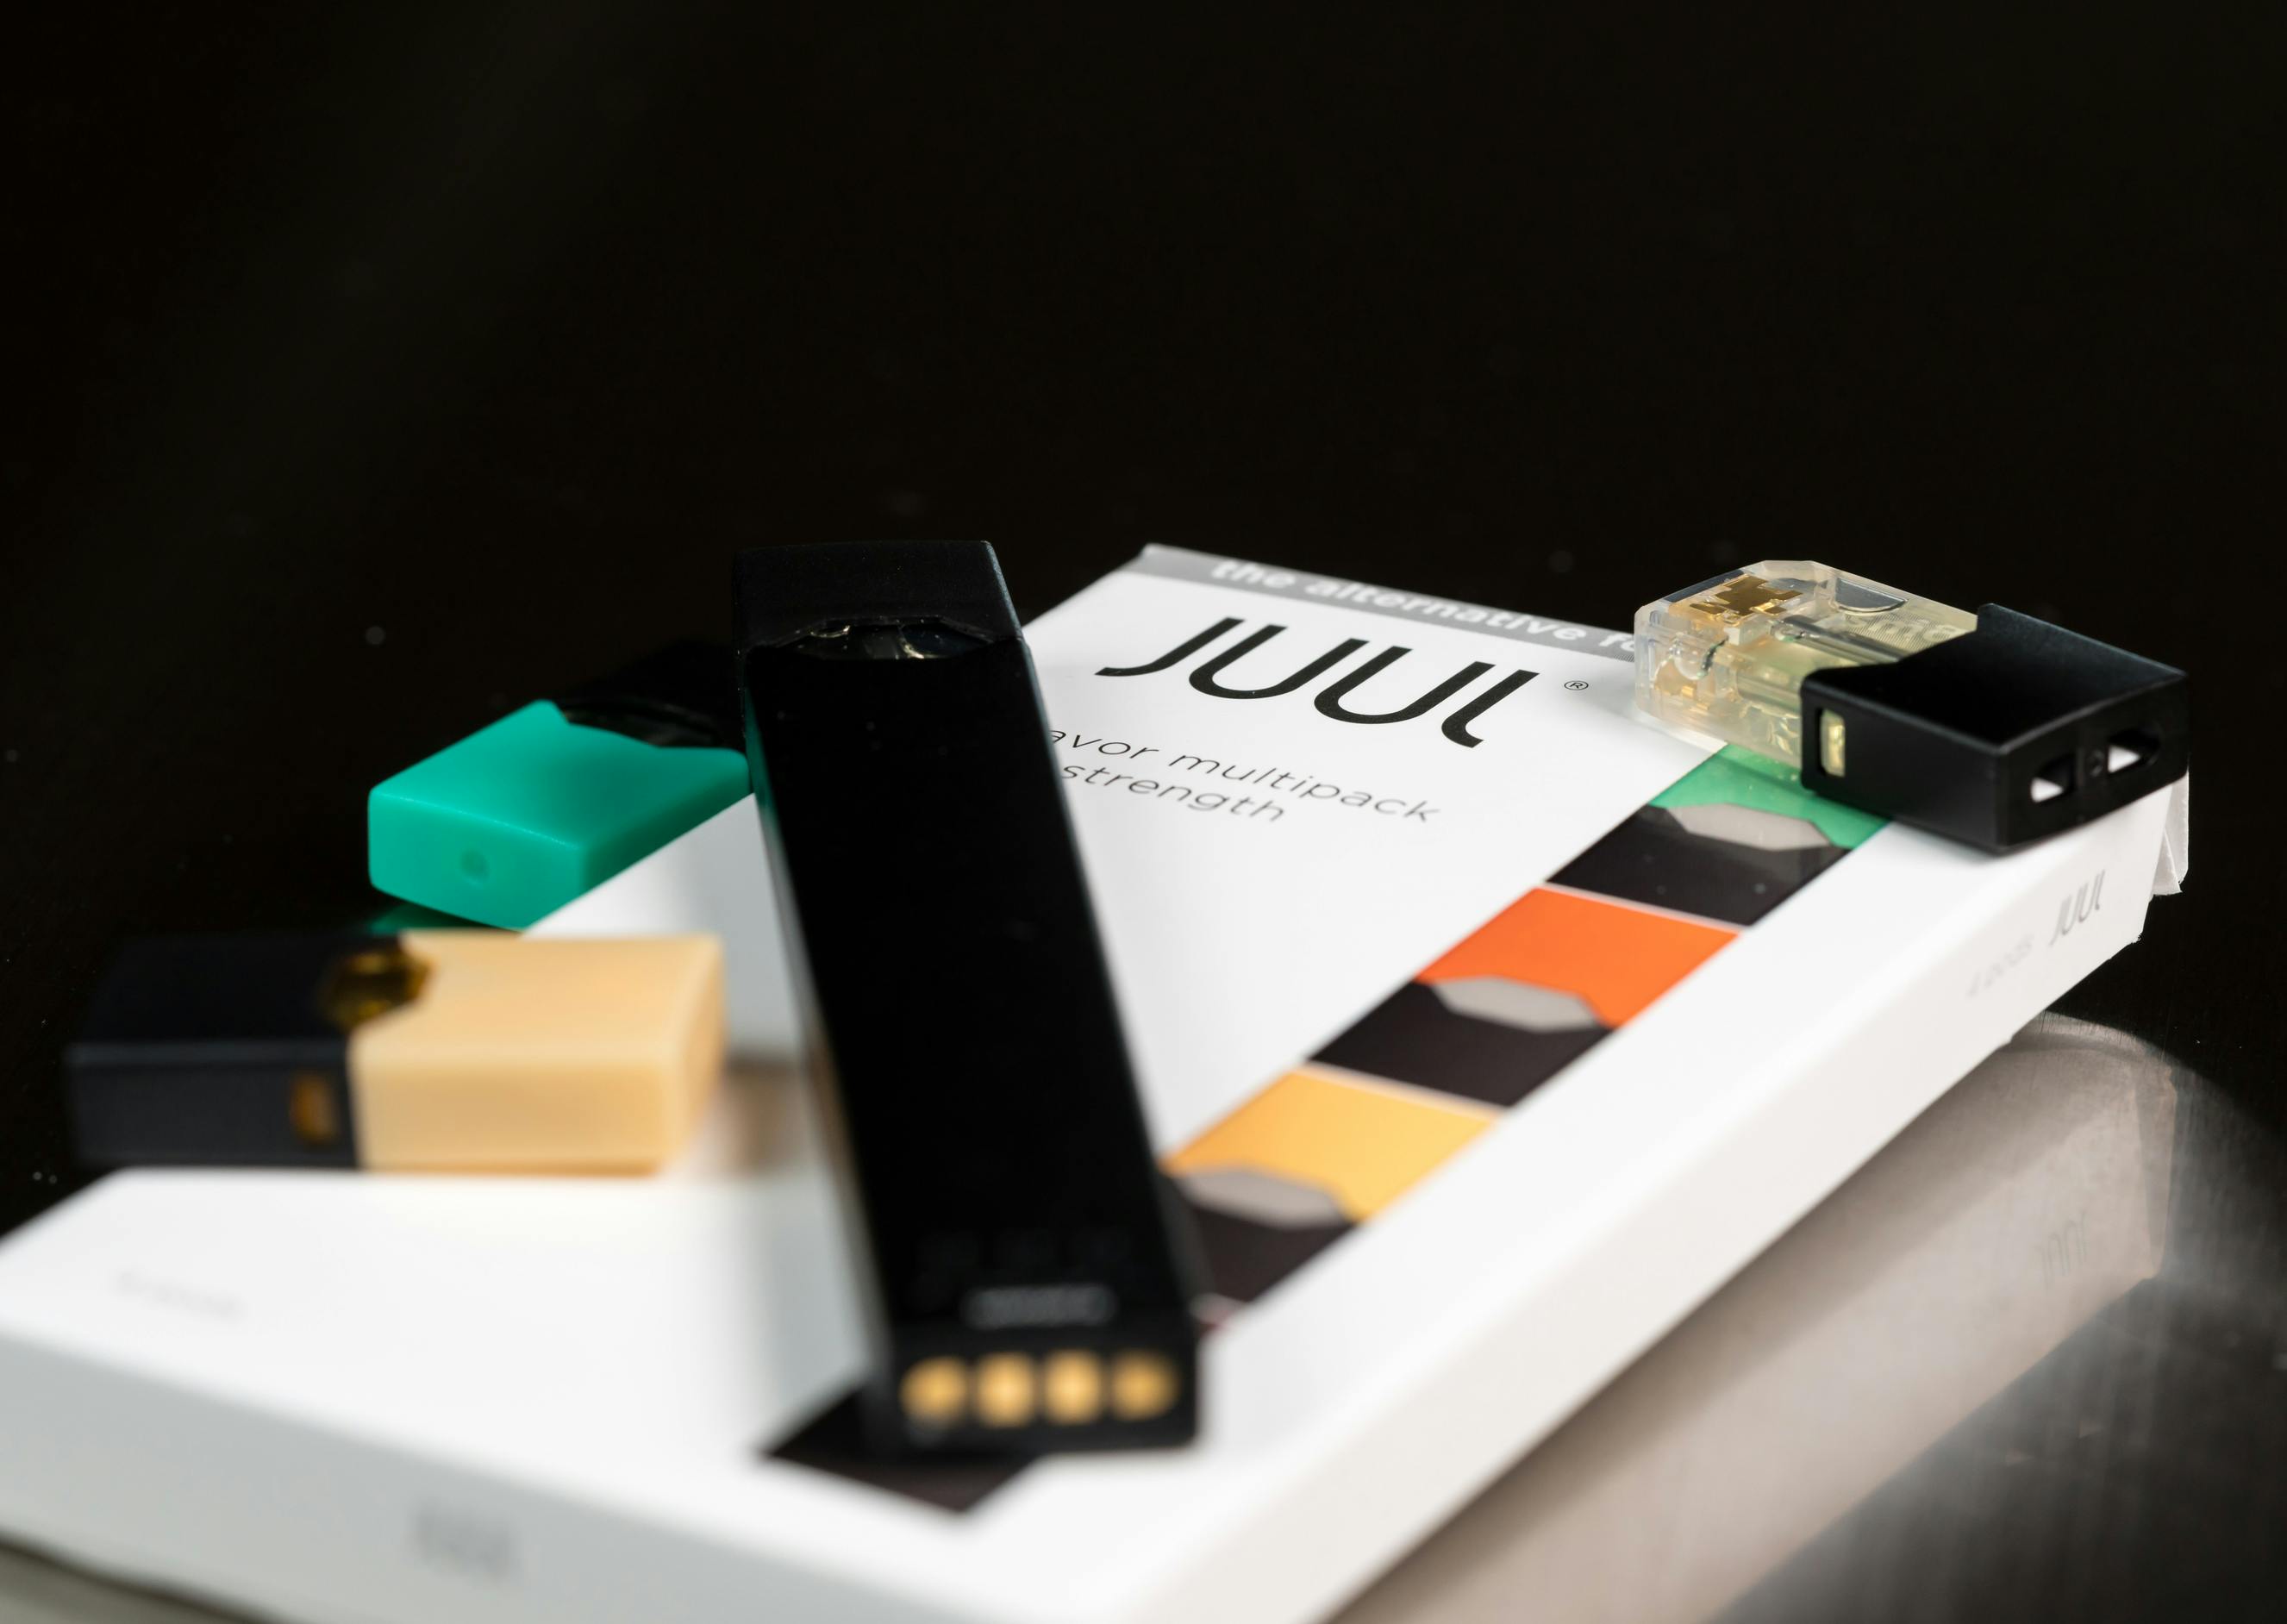 Juul Vape Settlement: Get a $50 Payout Without Proof of Purchase